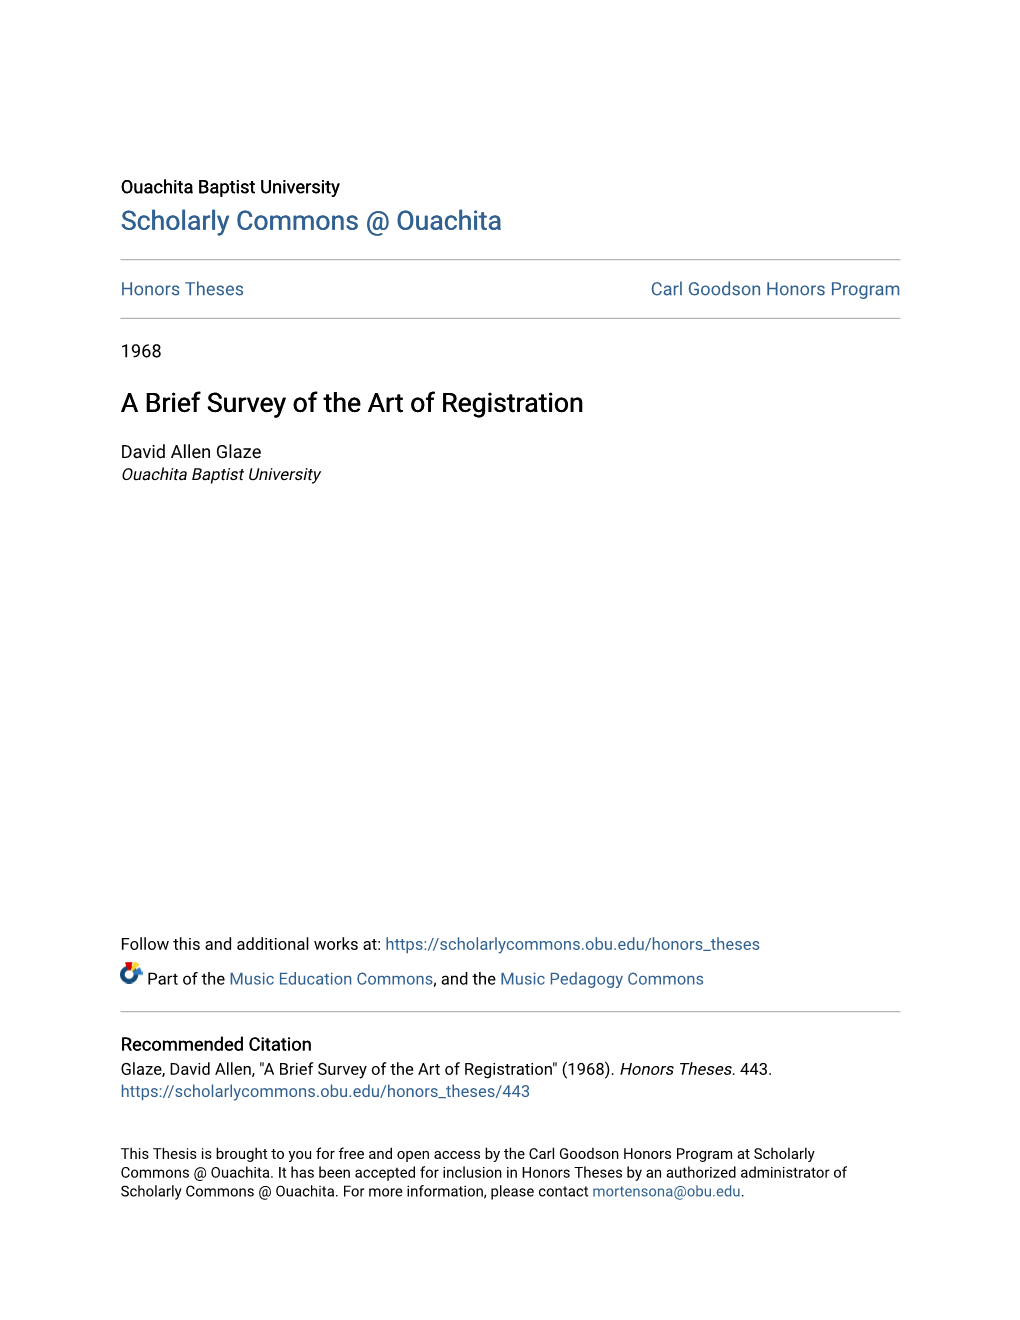 A Brief Survey of the Art of Registration